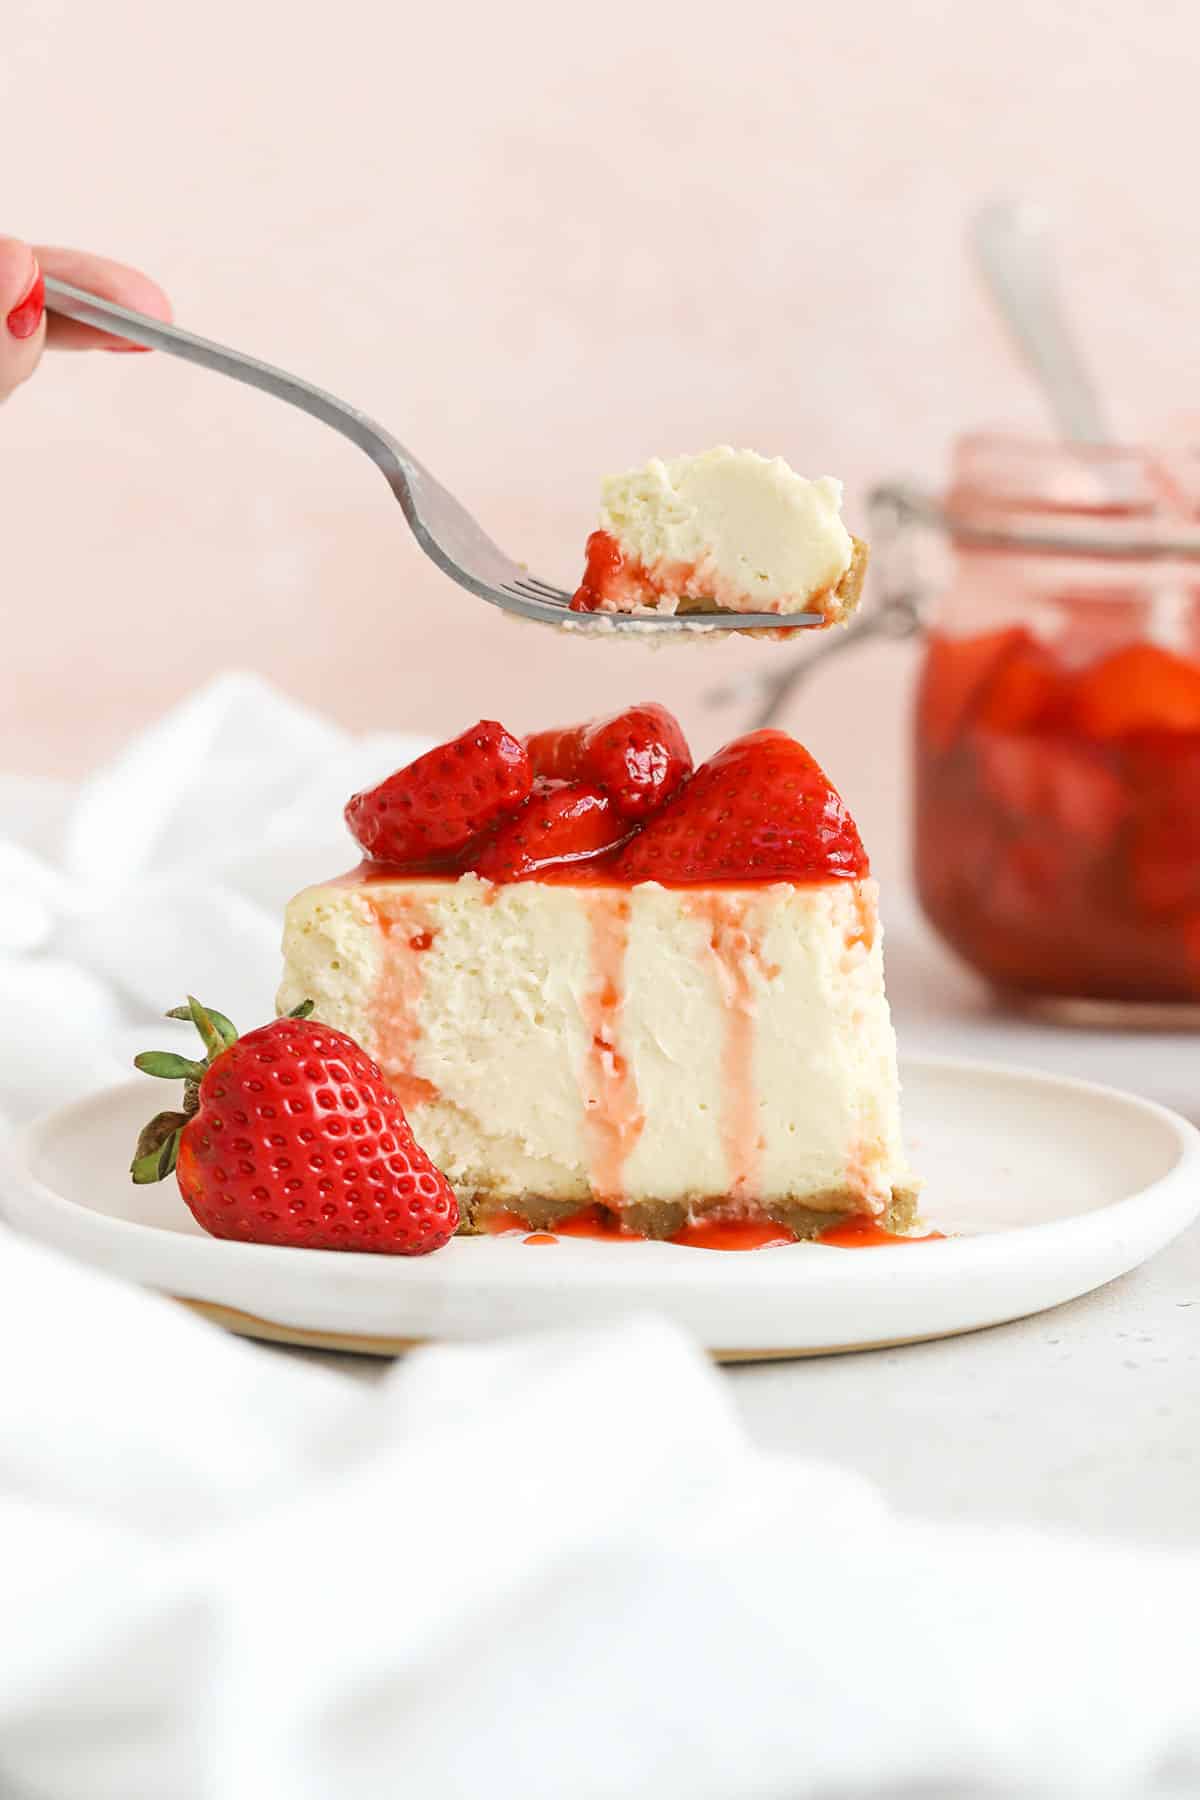 gluten-free strawberry cheesecake with strawberry topping